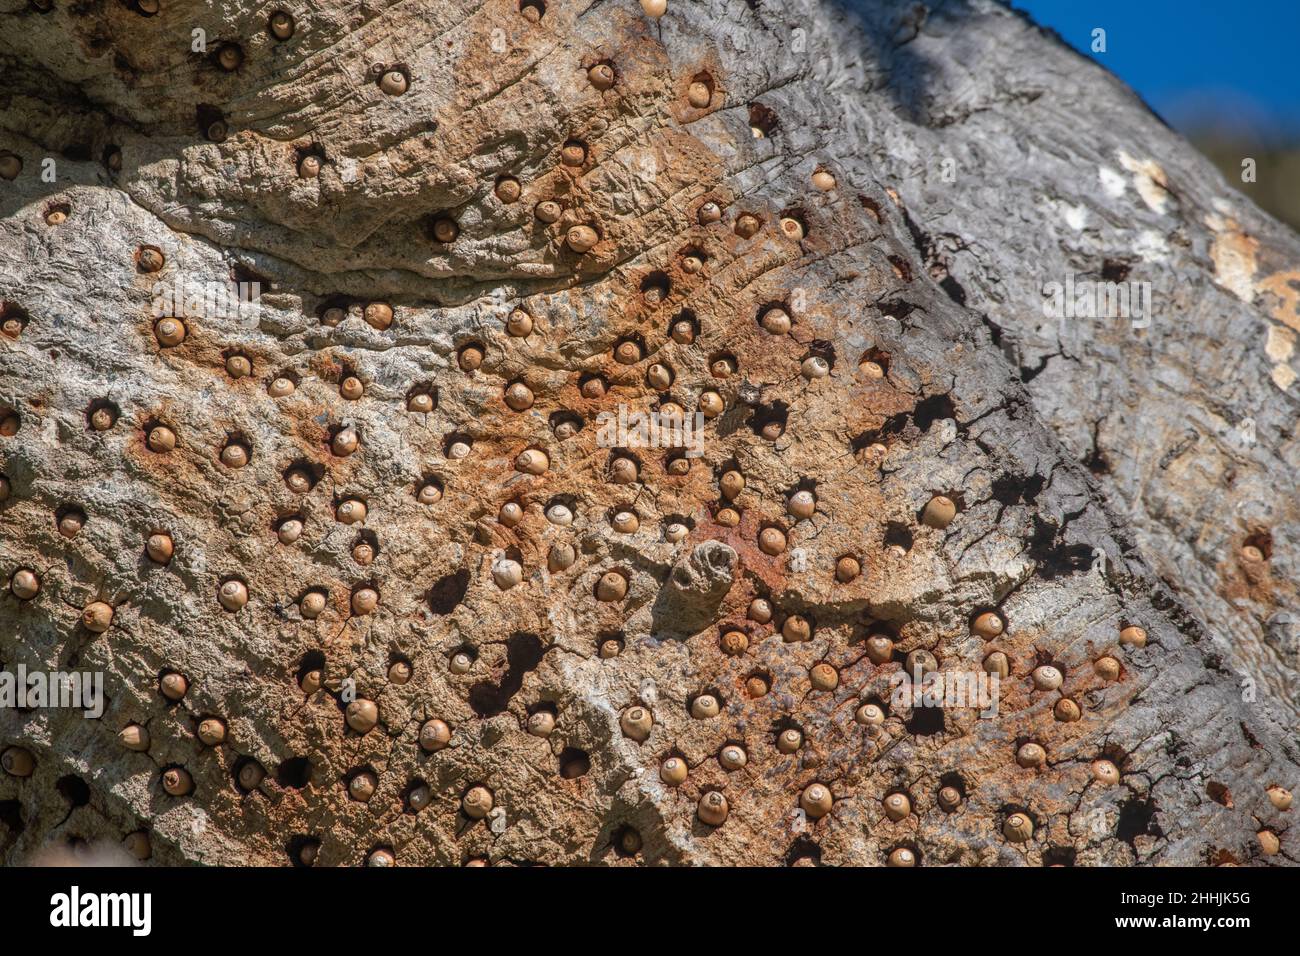 This oak tree serves as a granary tree for a group of acorn woodpeckers where they store acorns to eat later. Stock Photo